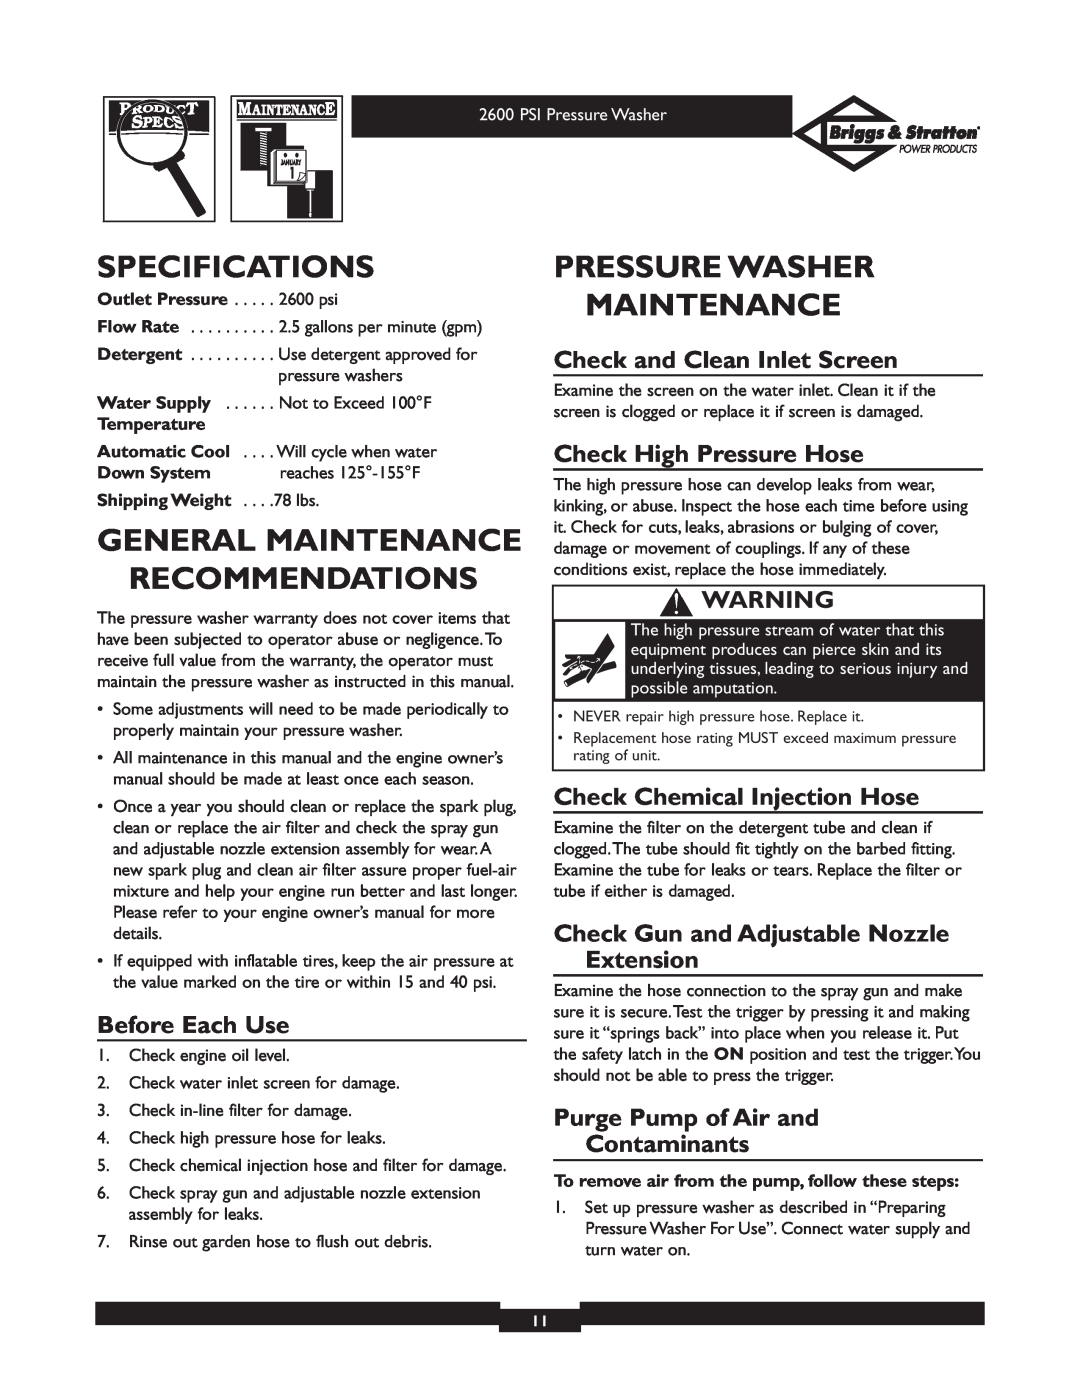 Briggs & Stratton 20216 Specifications, General Maintenance Recommendations, Pressure Washer Maintenance, Before Each Use 